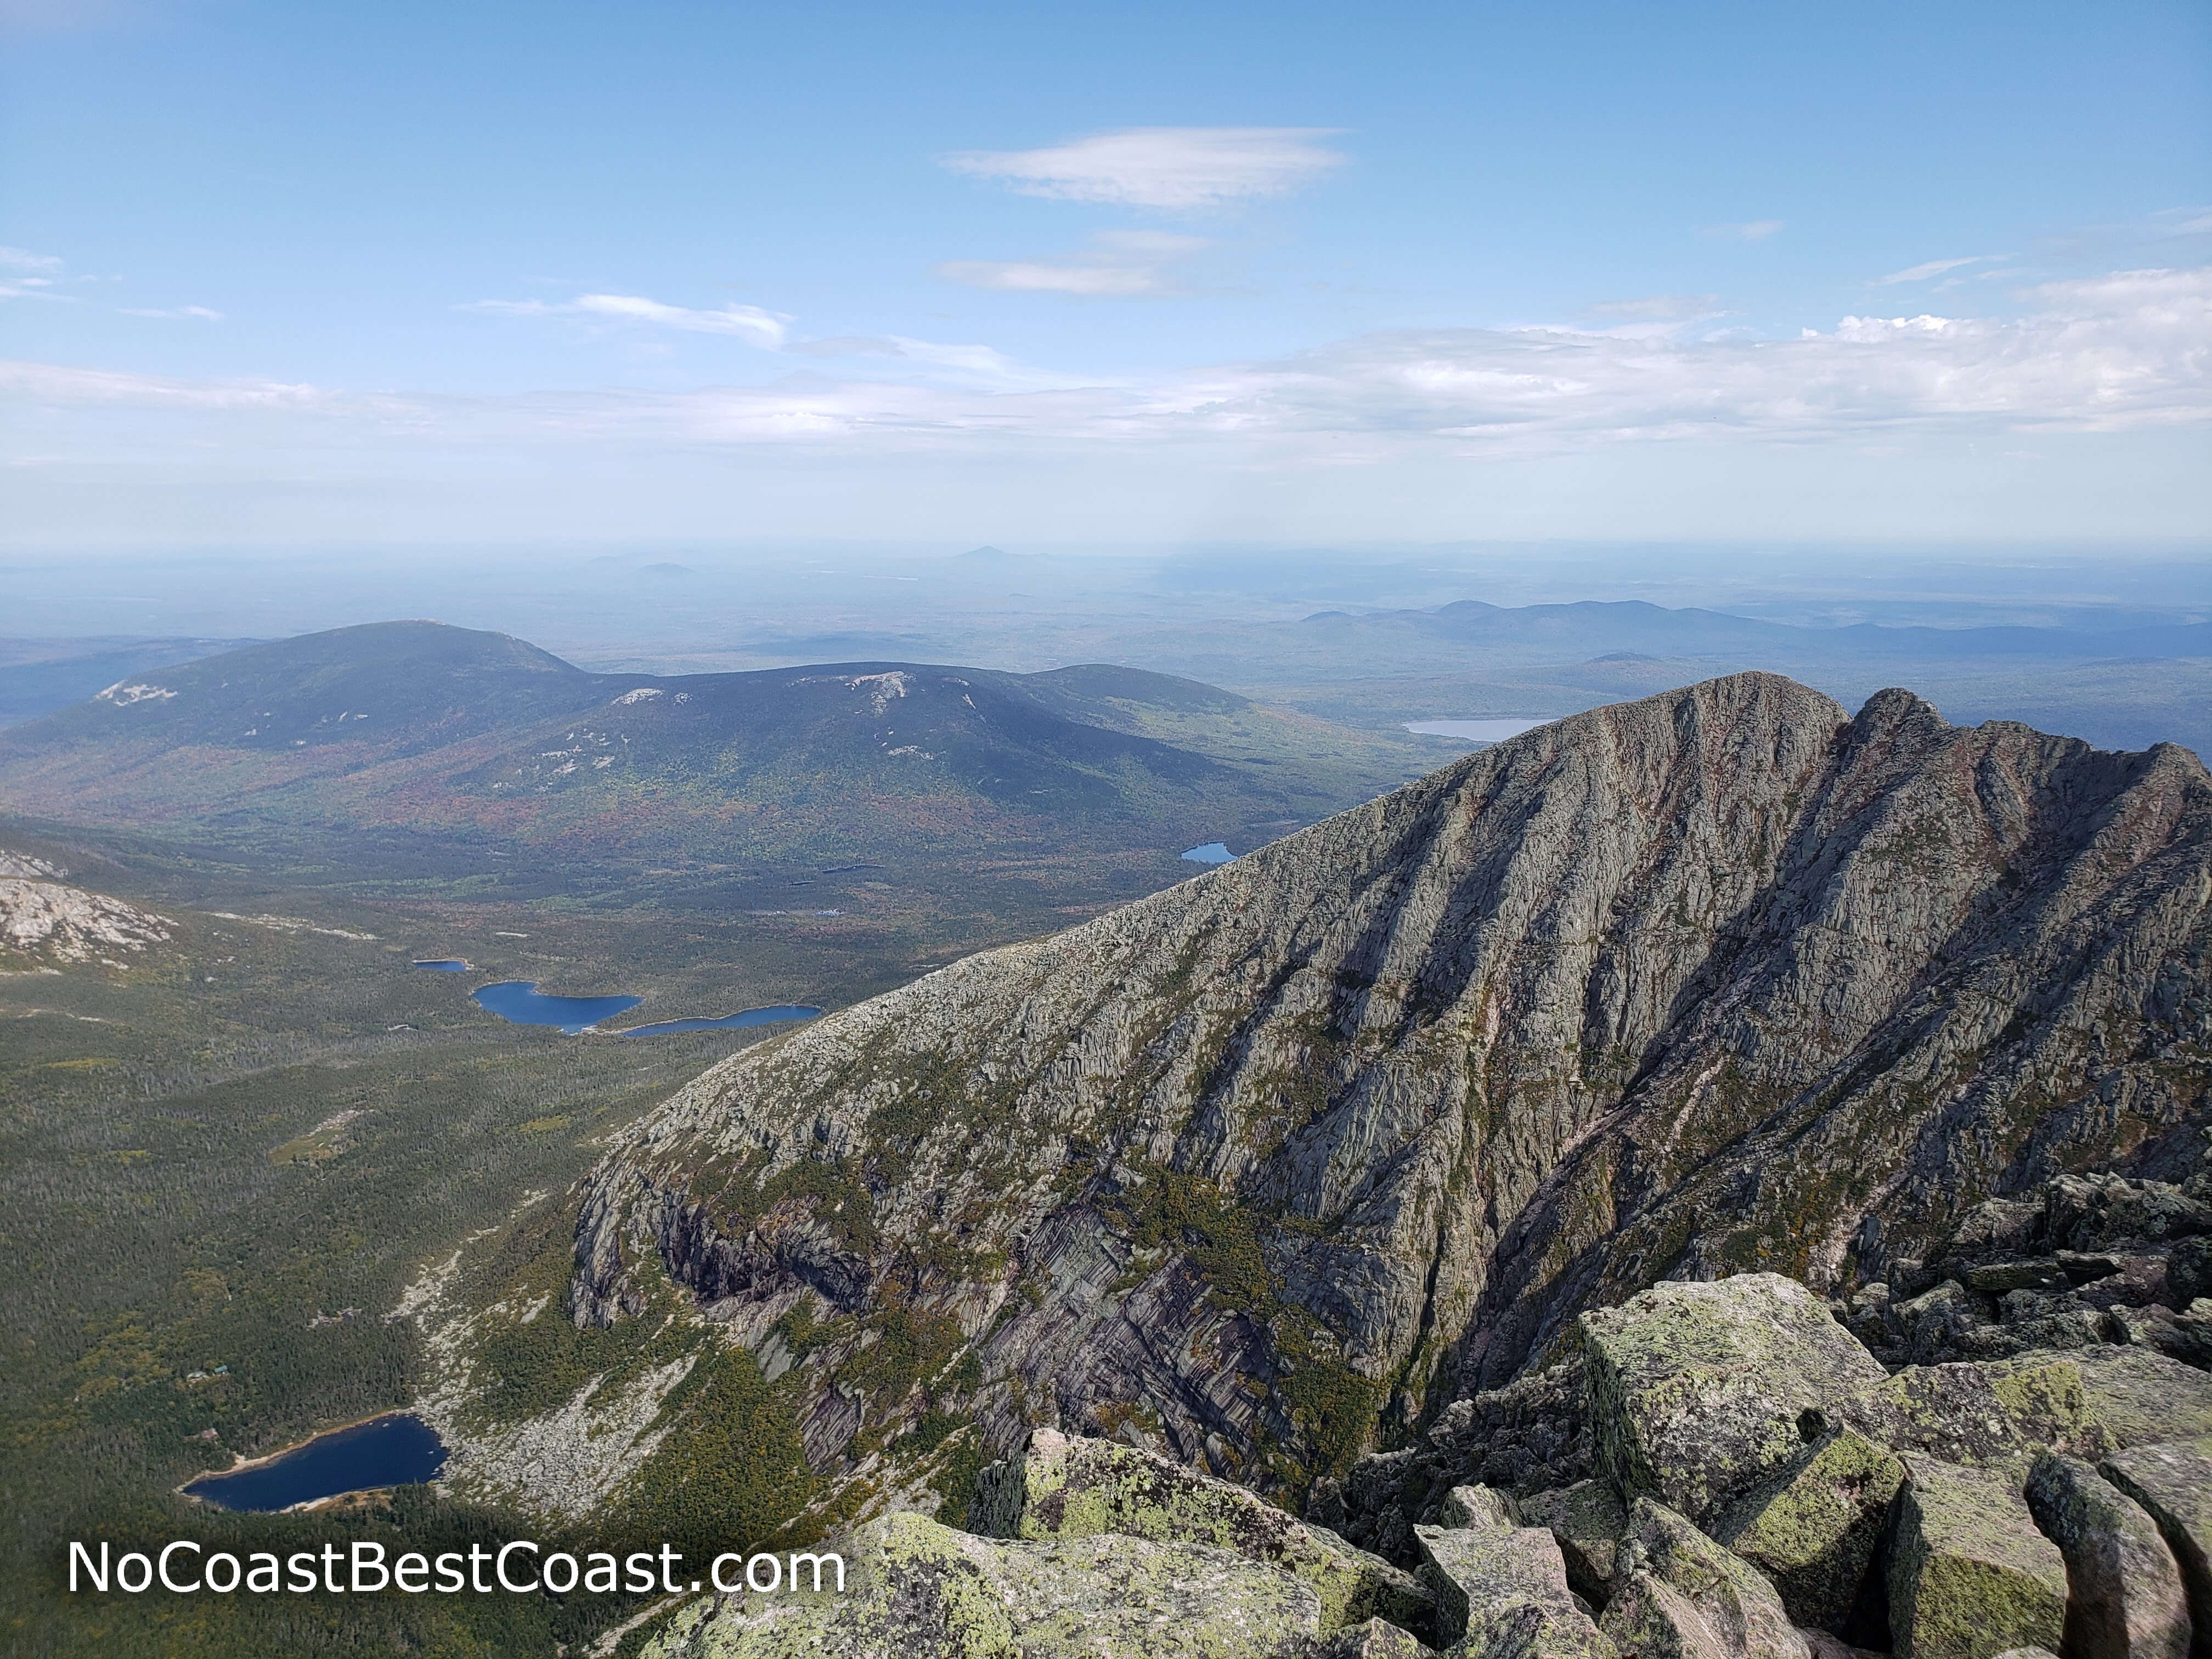 The views from the top of Mt. Katahdin are unforgettable